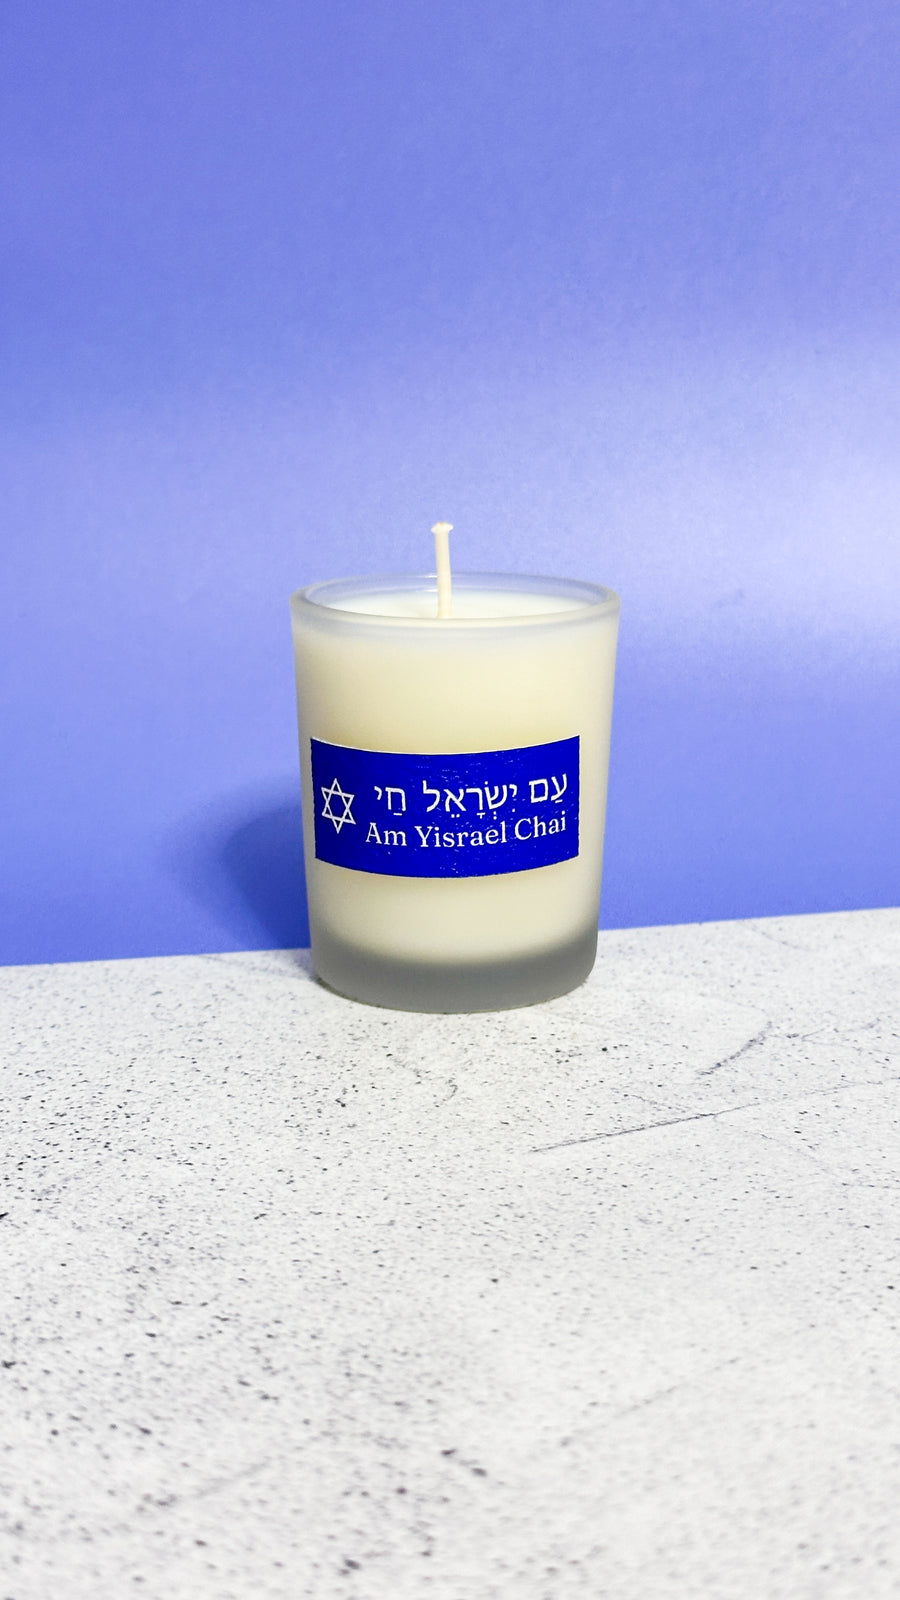 [SOLD OUT] JNF Israel Emergency Campaign For the Gaza Border Communities